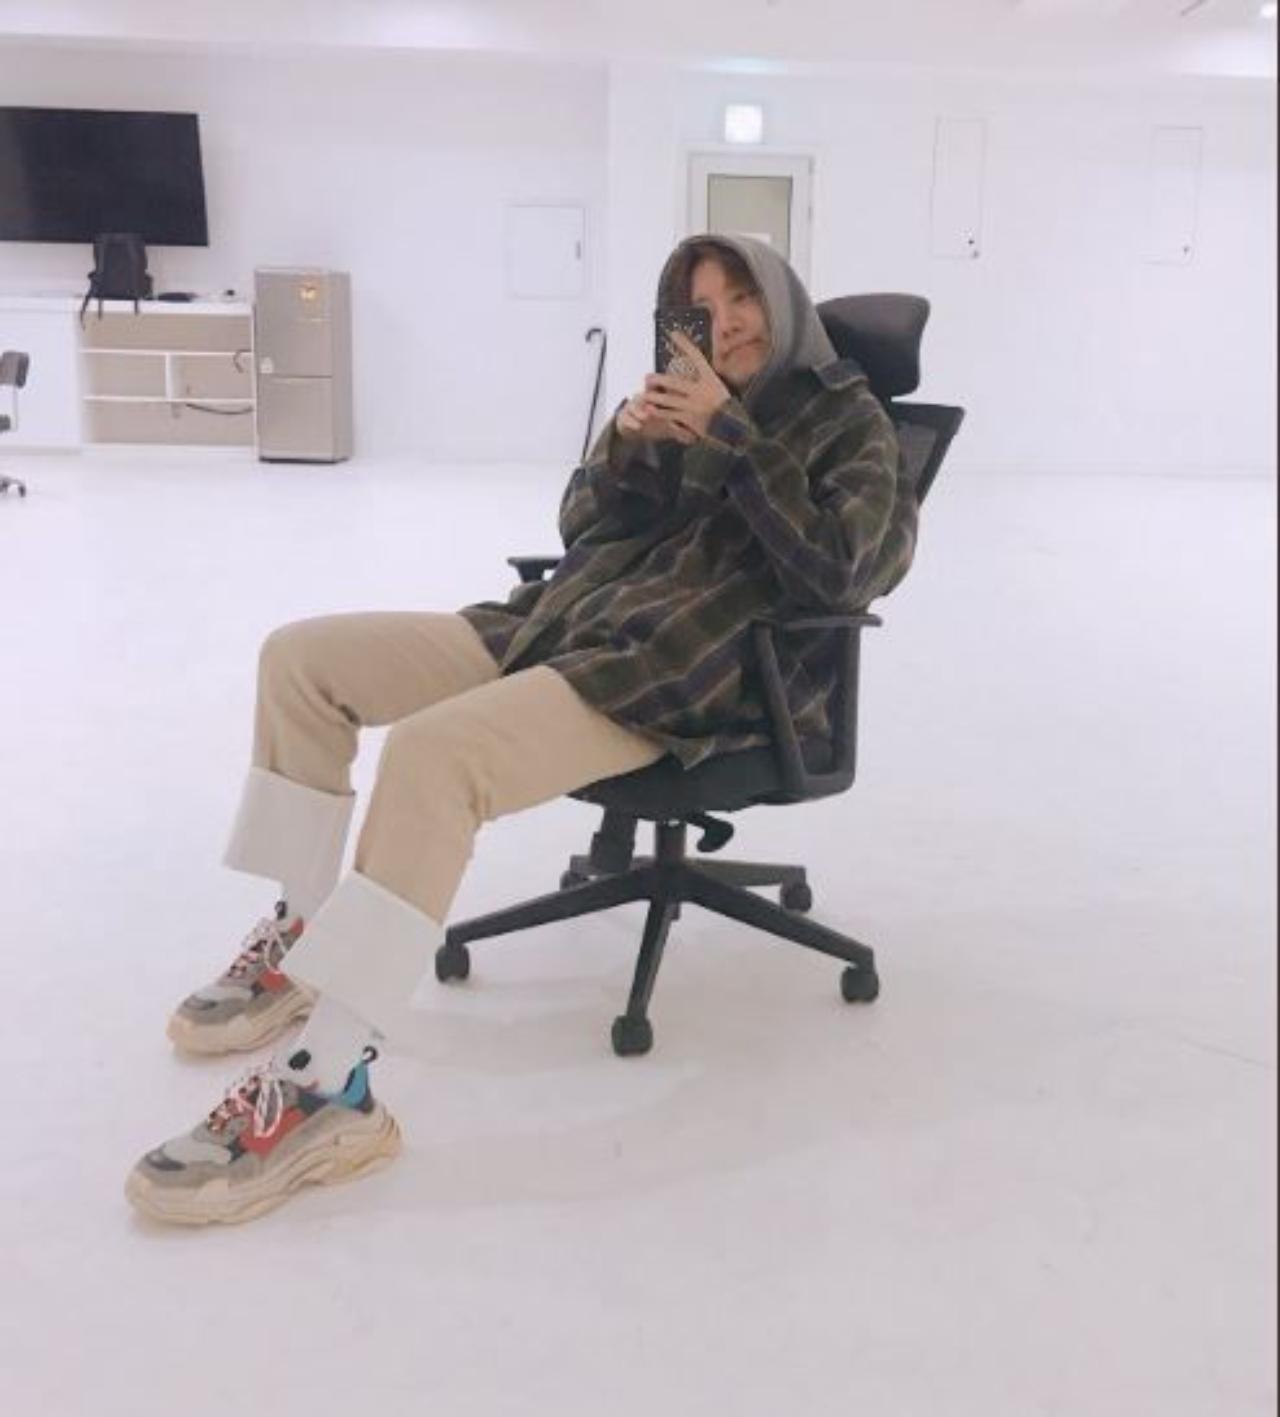 J-Hope seems to be kicking back after a long evening of dance practice in his fabulous orange-blue shoes